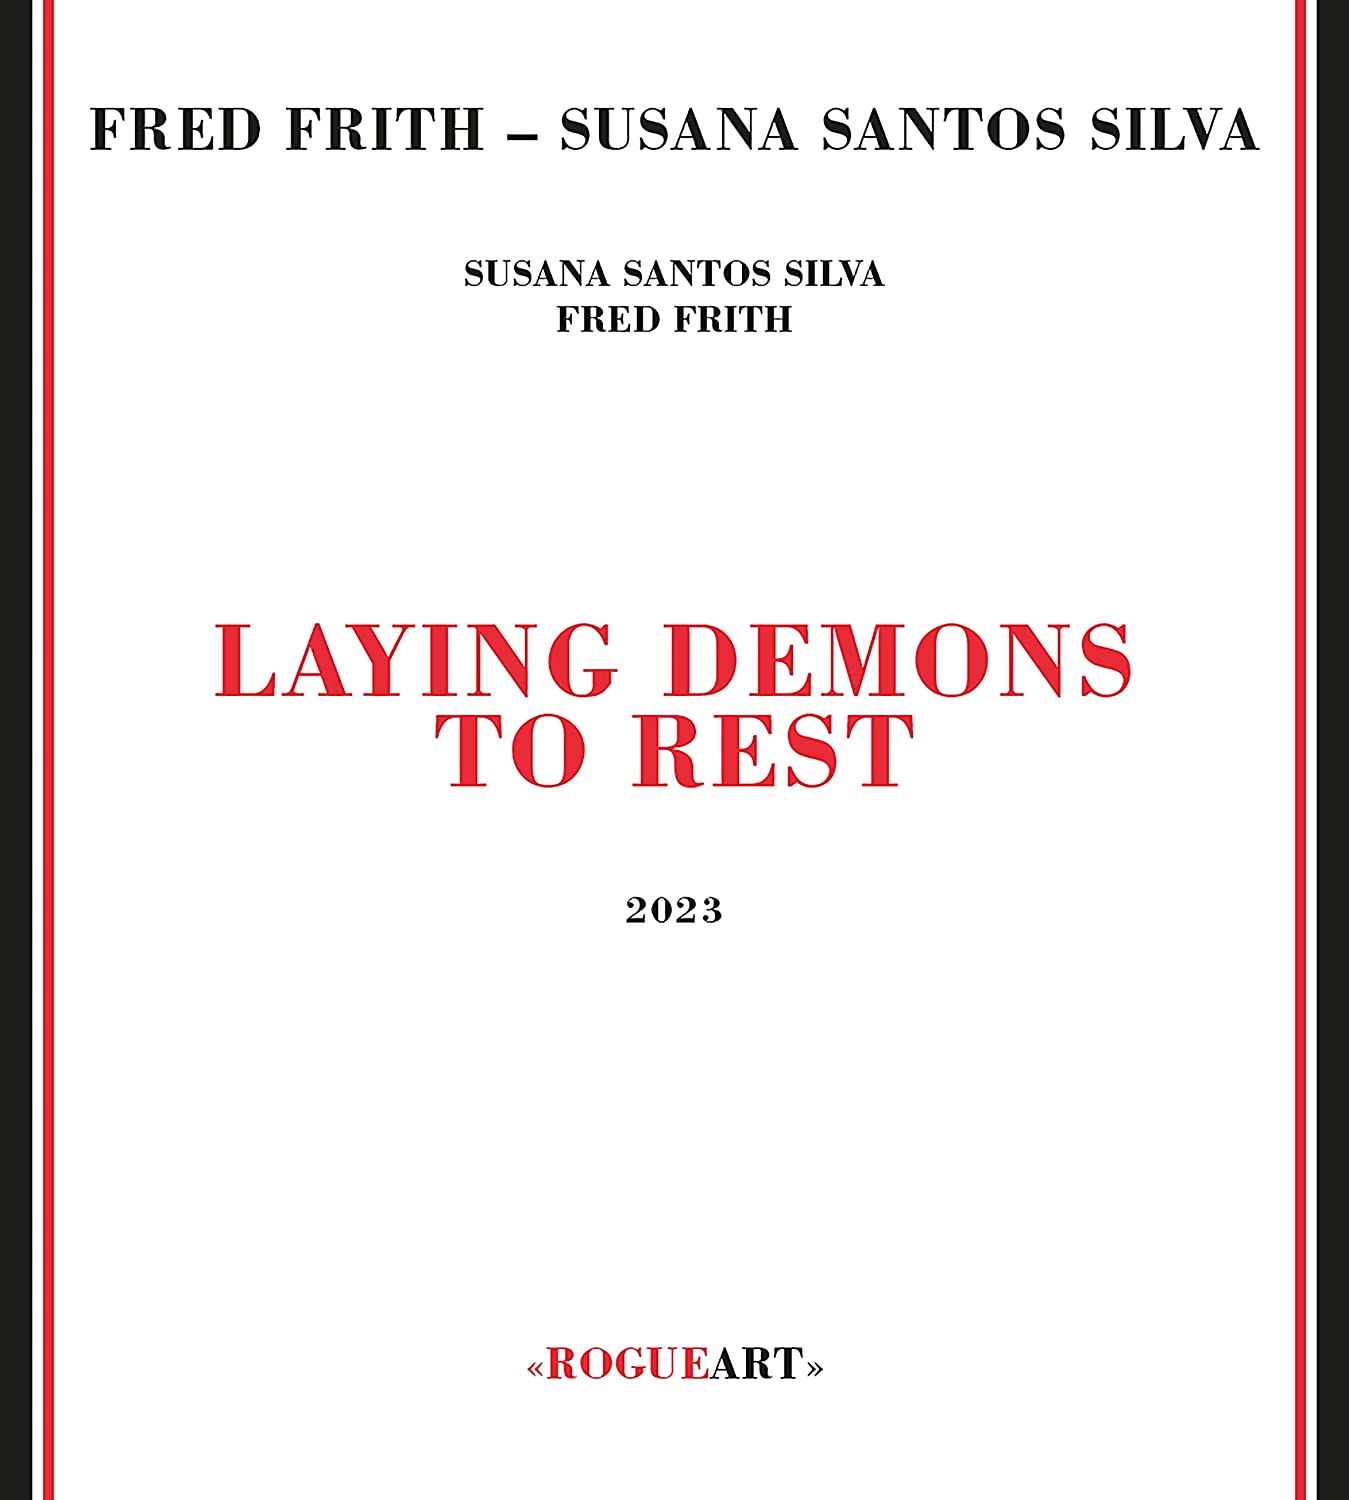 FRED FRITH - Laying Demons To Rest cover 